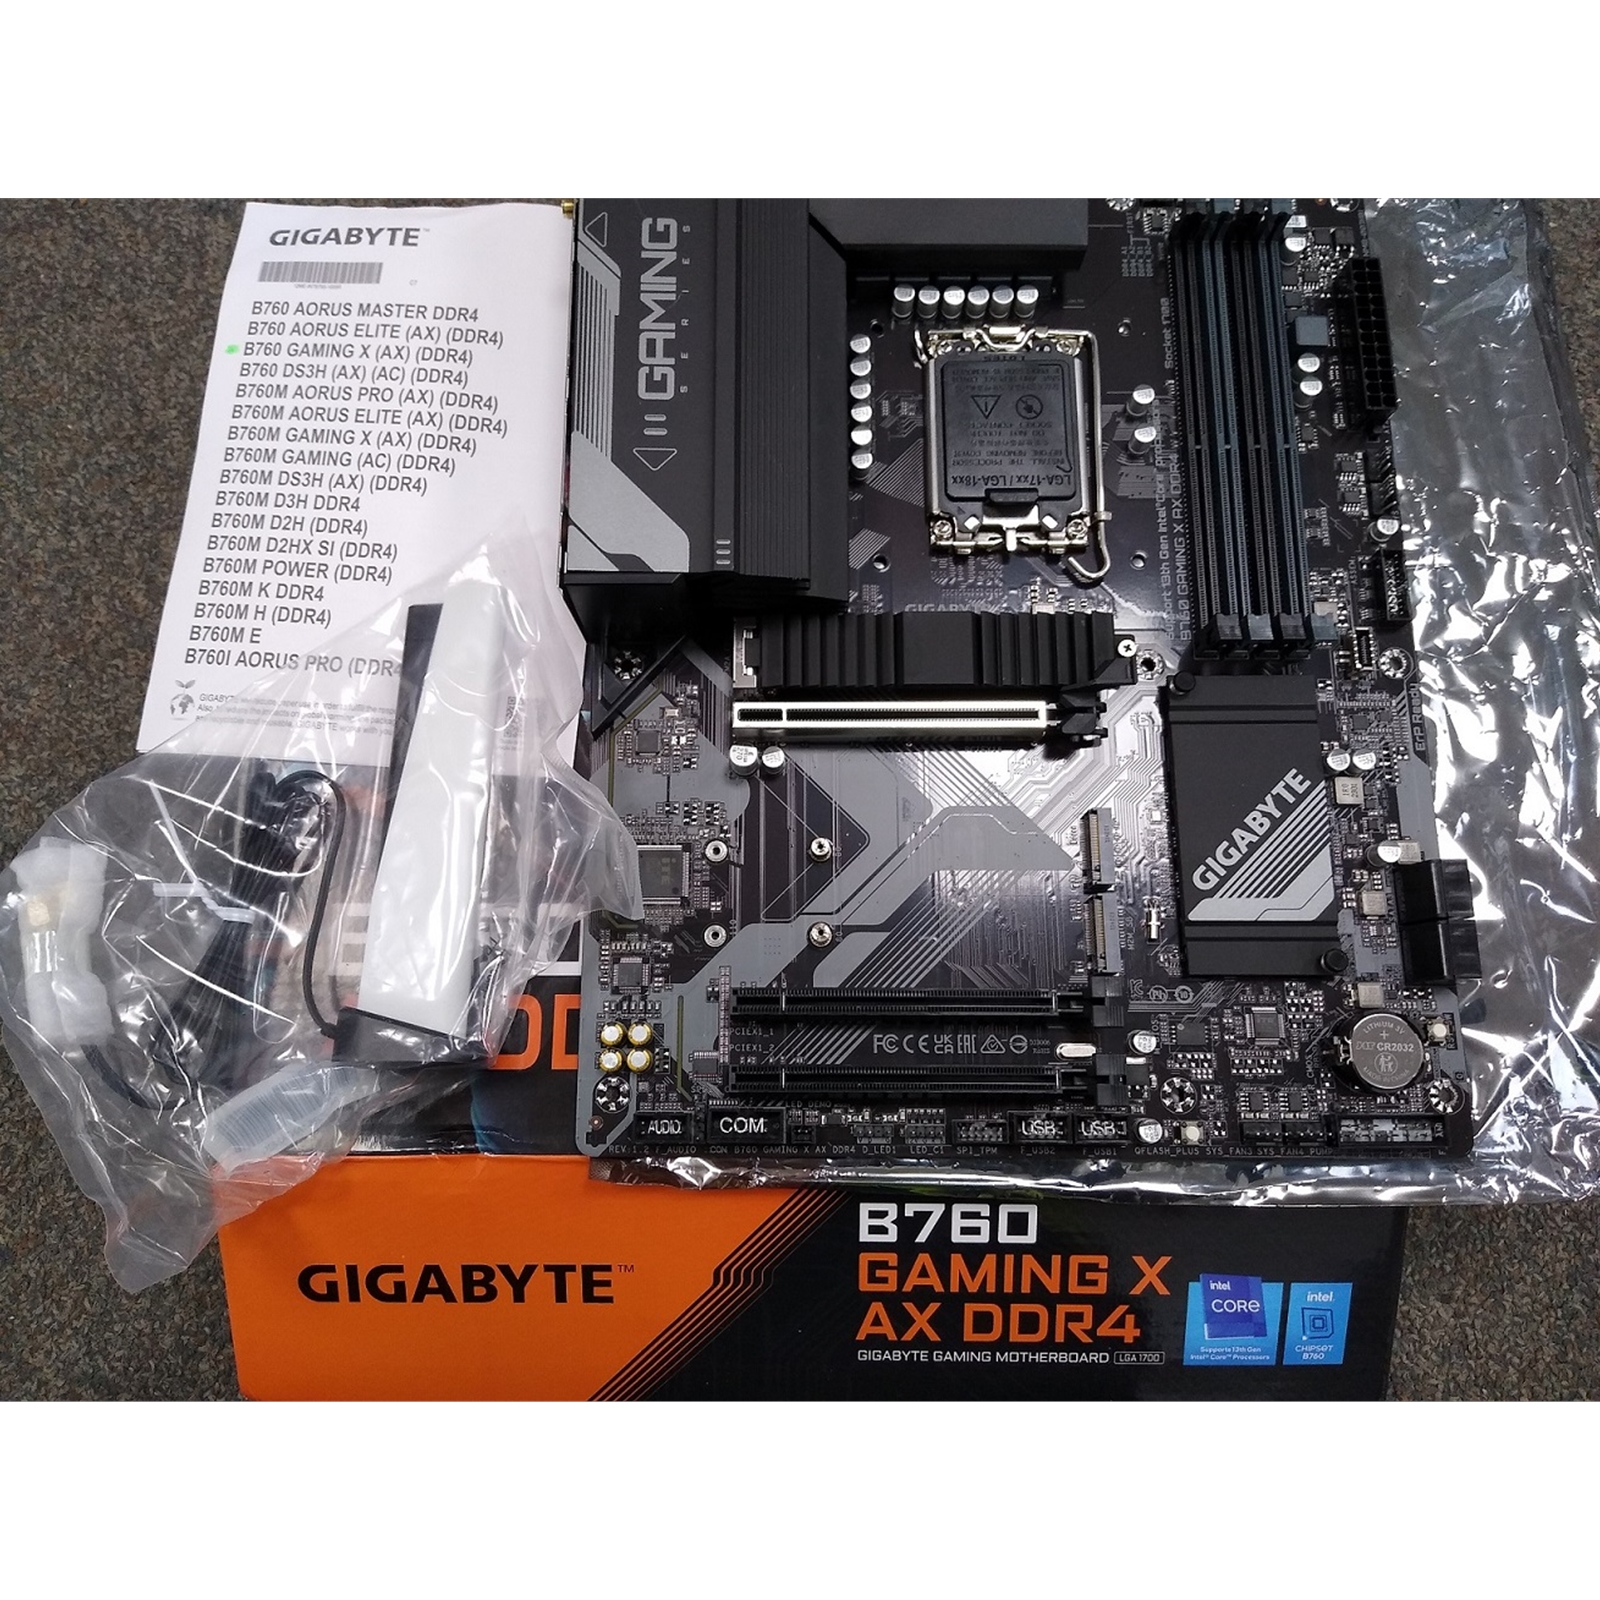 Compatible cases with Gigabyte B760 GAMING X DDR4 - Pangoly